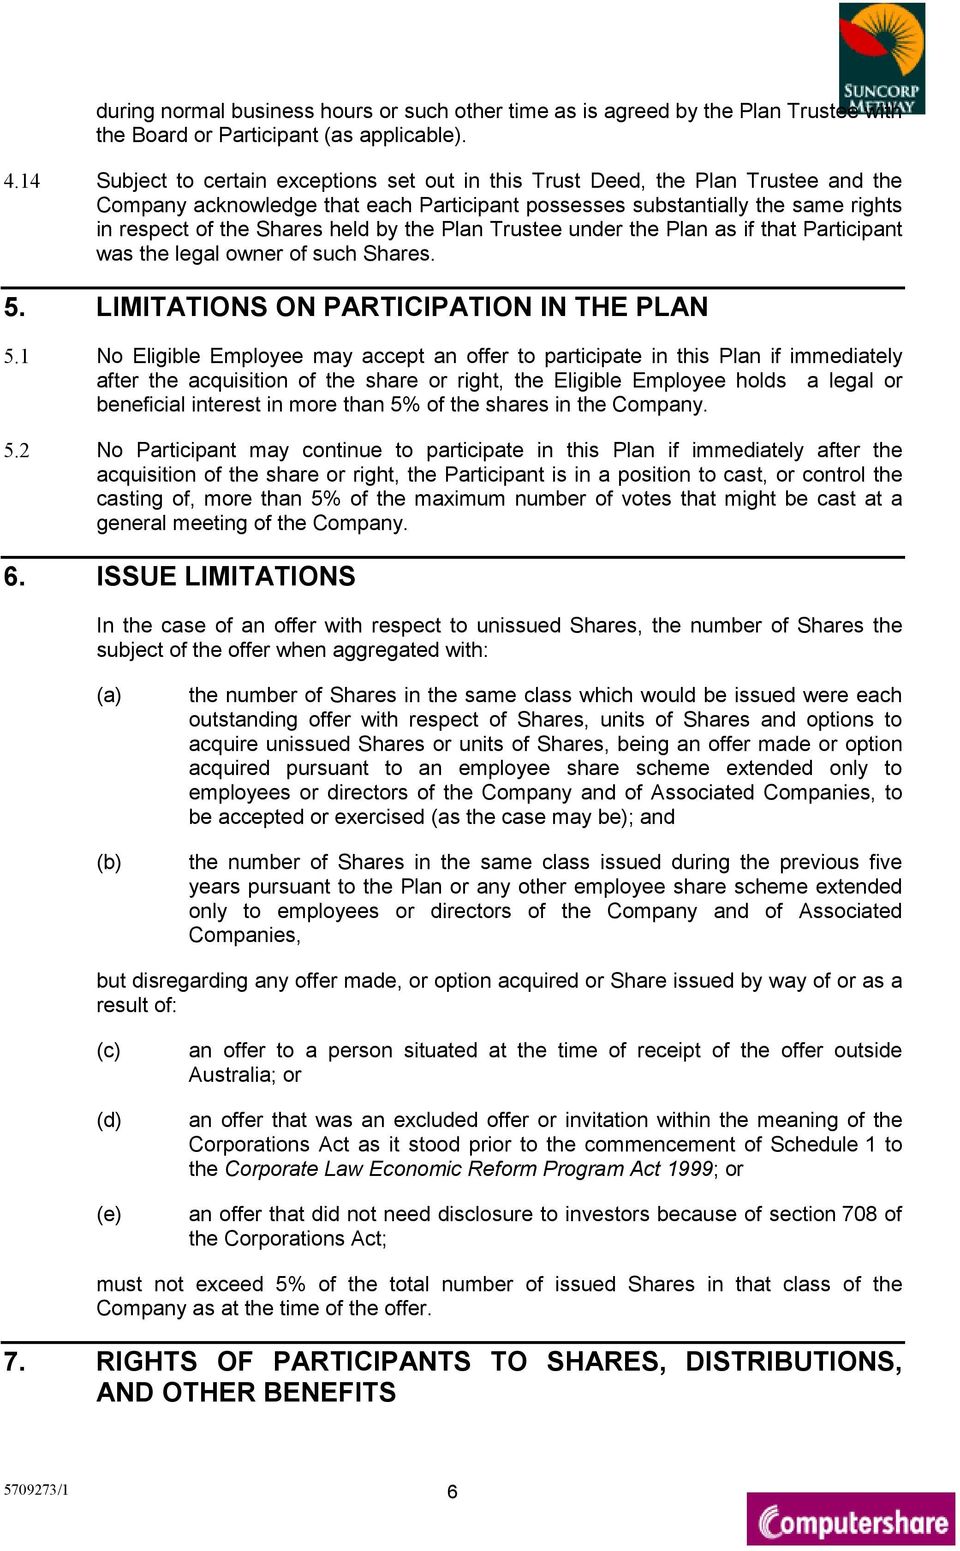 by the Plan Trustee under the Plan as if that Participant was the legal owner of such Shares. 5. LIMITATIONS ON PARTICIPATION IN THE PLAN 5.